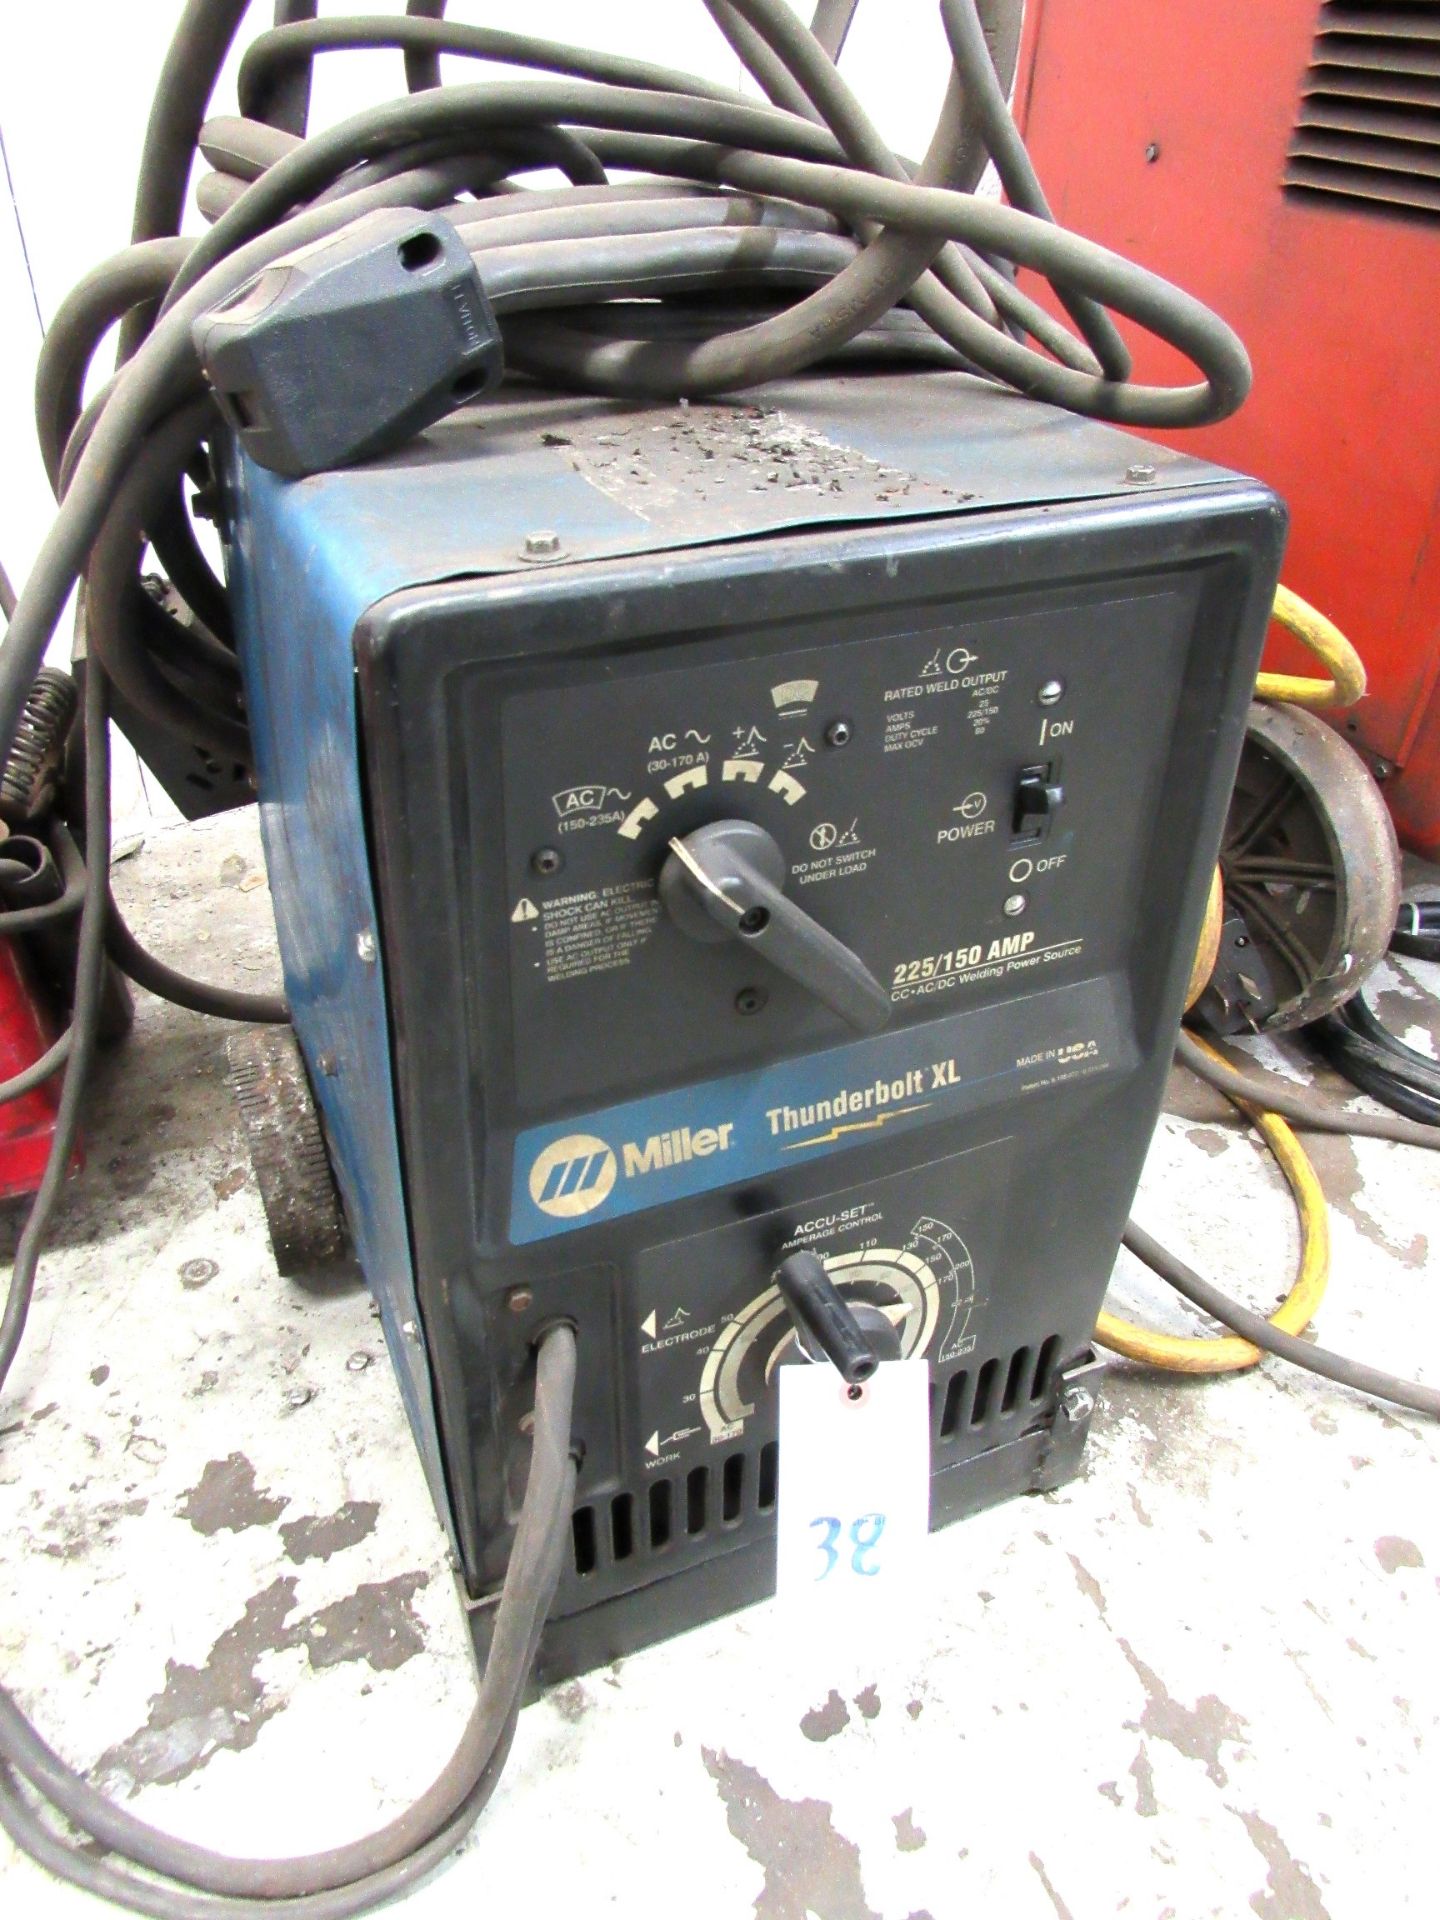 Miller Thunderbolt XL 225/ 150 Amp Welder - w/ Cables , Clamps